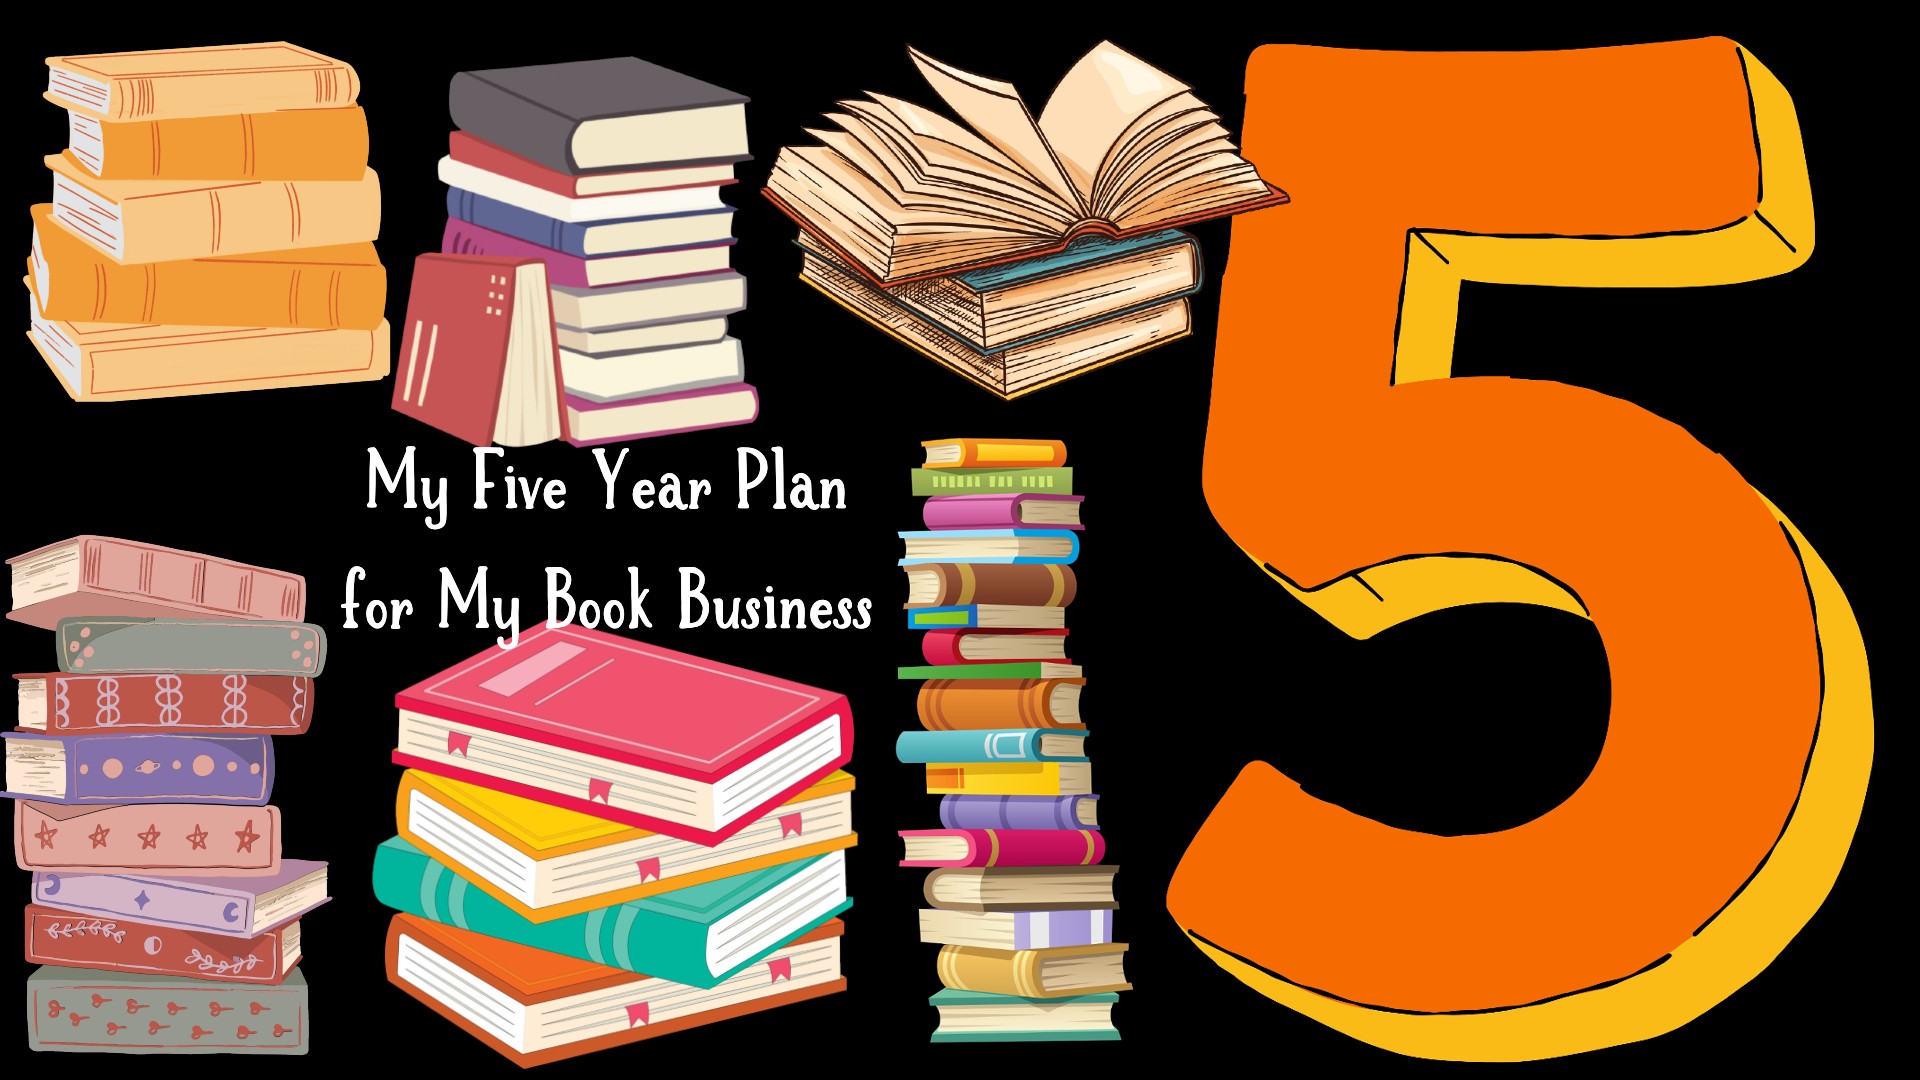 My Five Year Pan for My Book Business